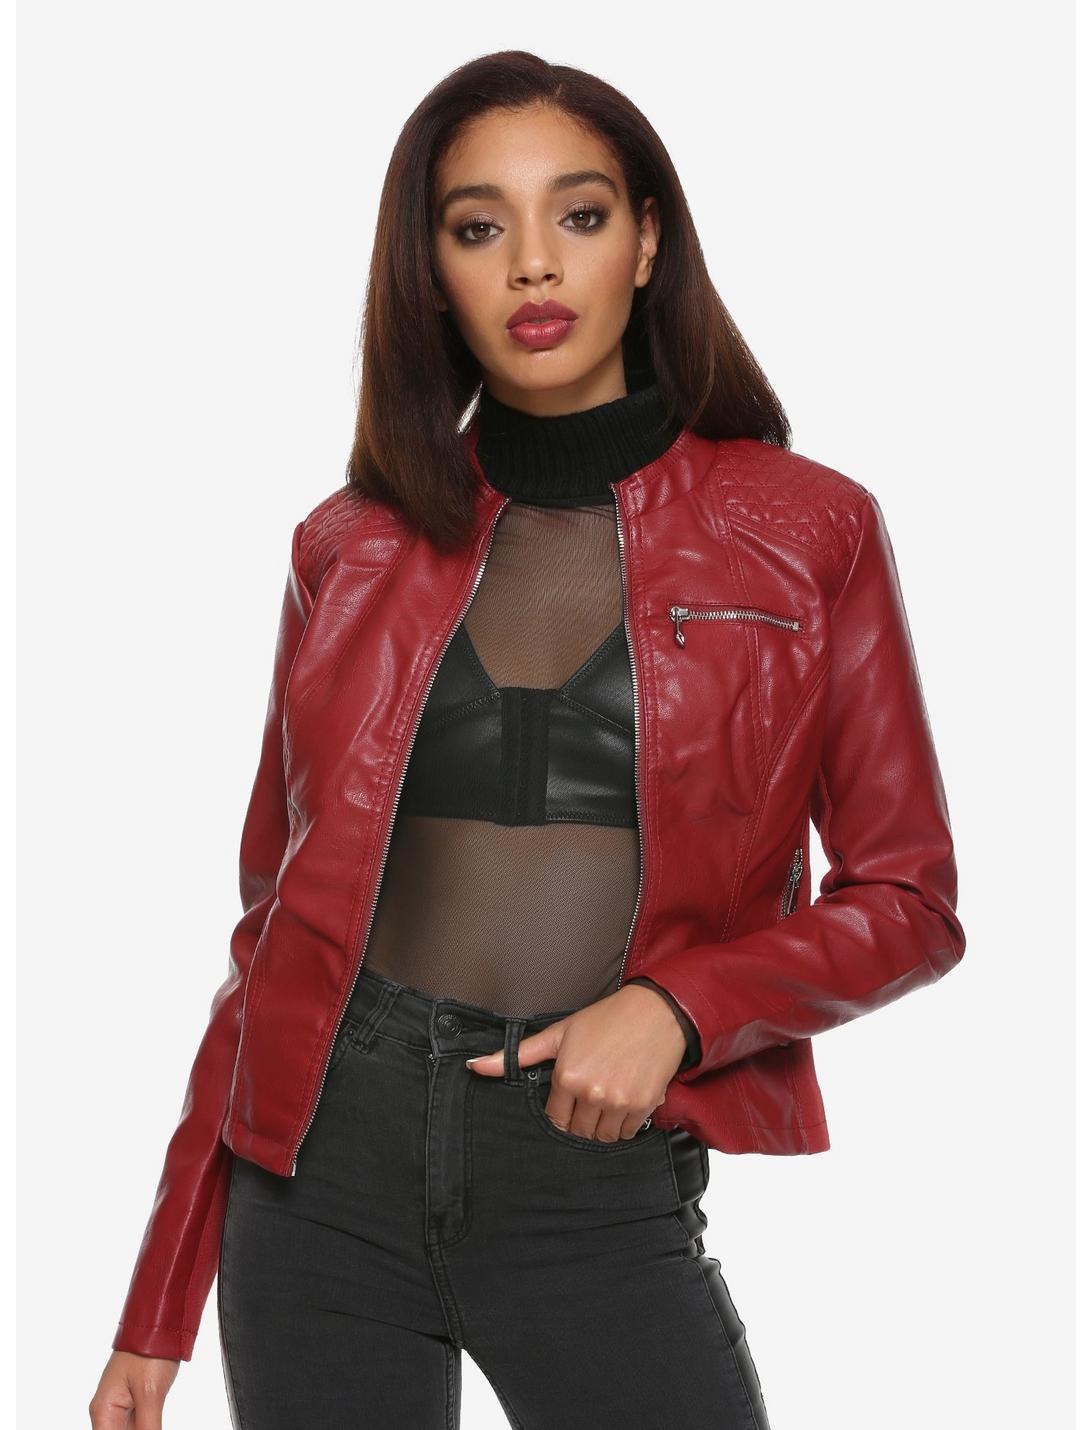 Dusty Red Girls Moto Jacket, RED, hi-res